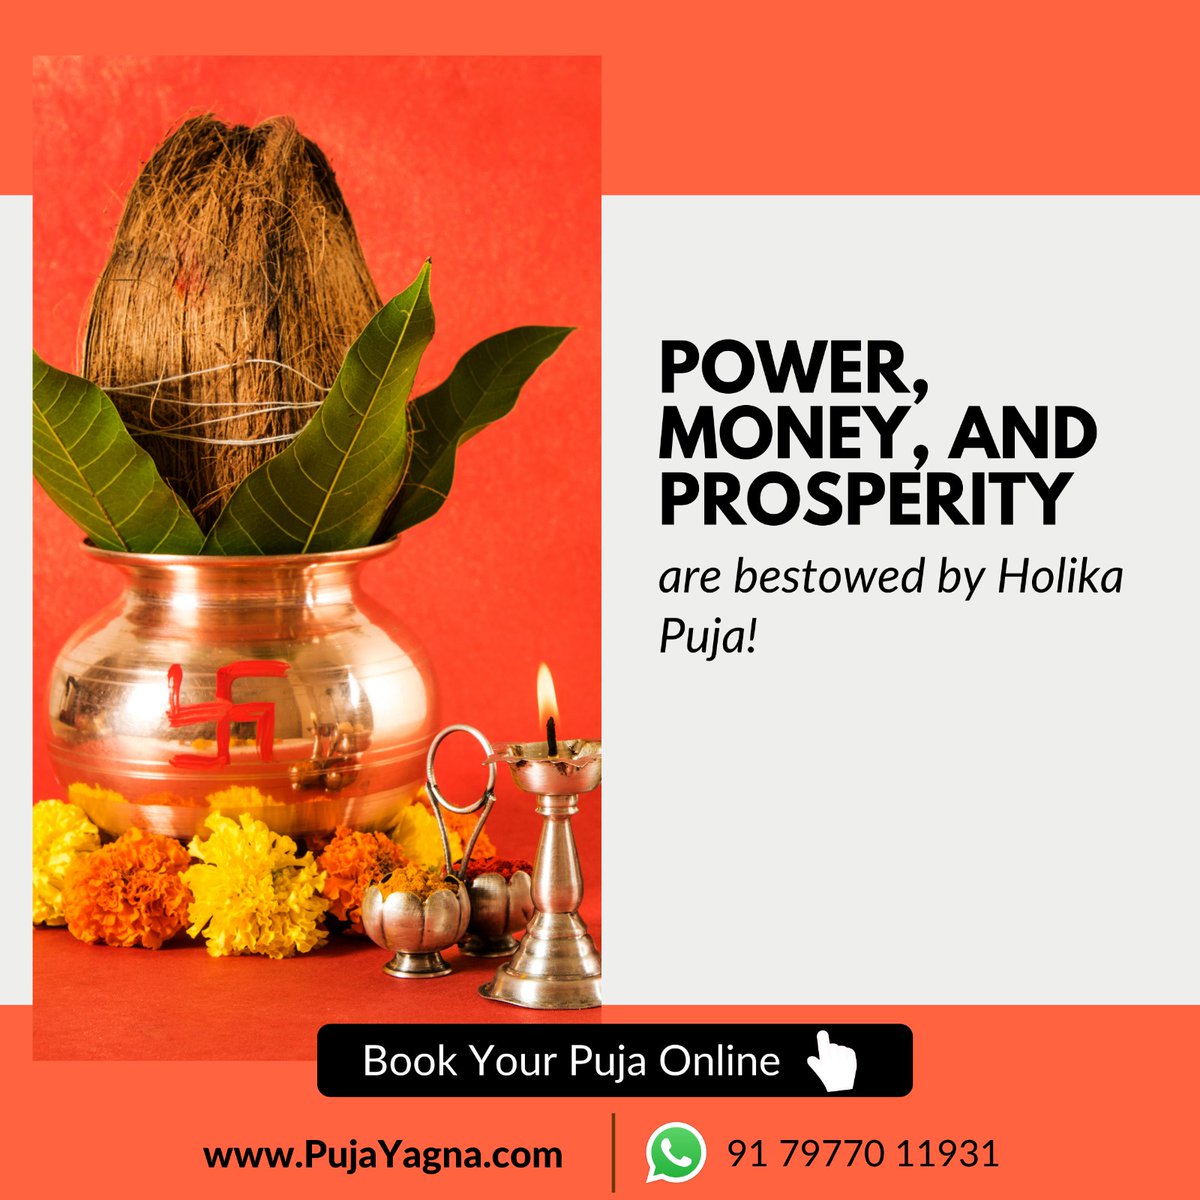 Power, money, and prosperity are bestowed by Holika Puja!

To book the puja online, visit pujayagna.com/products/holi-…

#bookforpandit #onlinepoojan #onlinepoojabooking #onlinepoojaservices #onlineprasad #onlinebookings  #onlineconcert